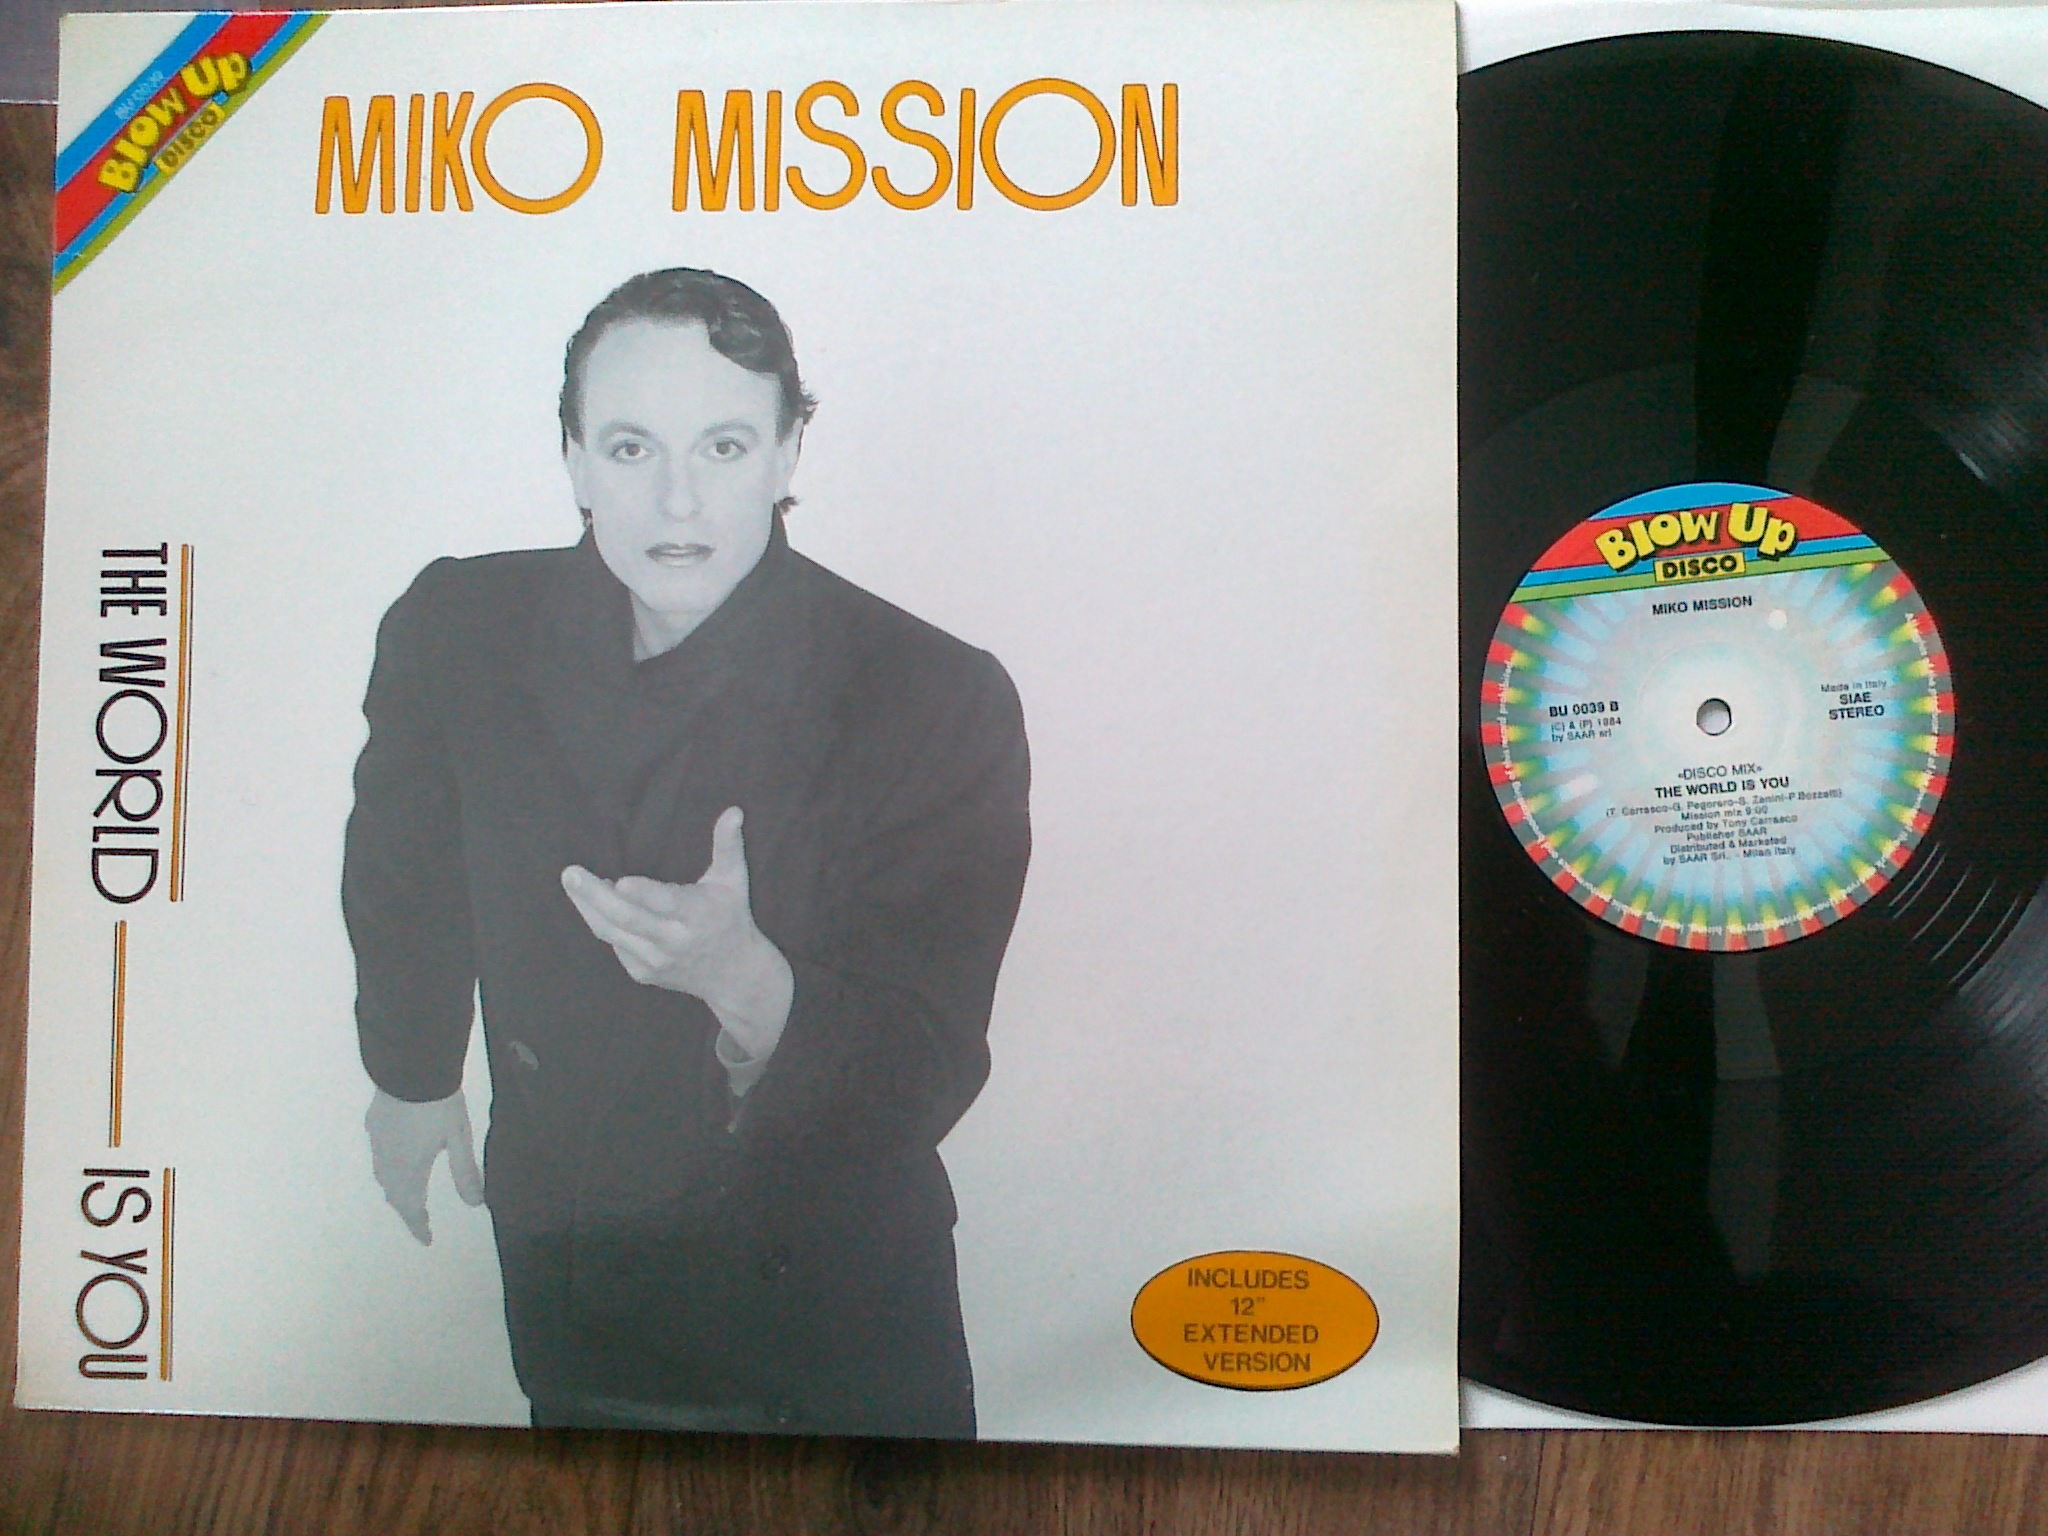 Miko Mission - The world is you